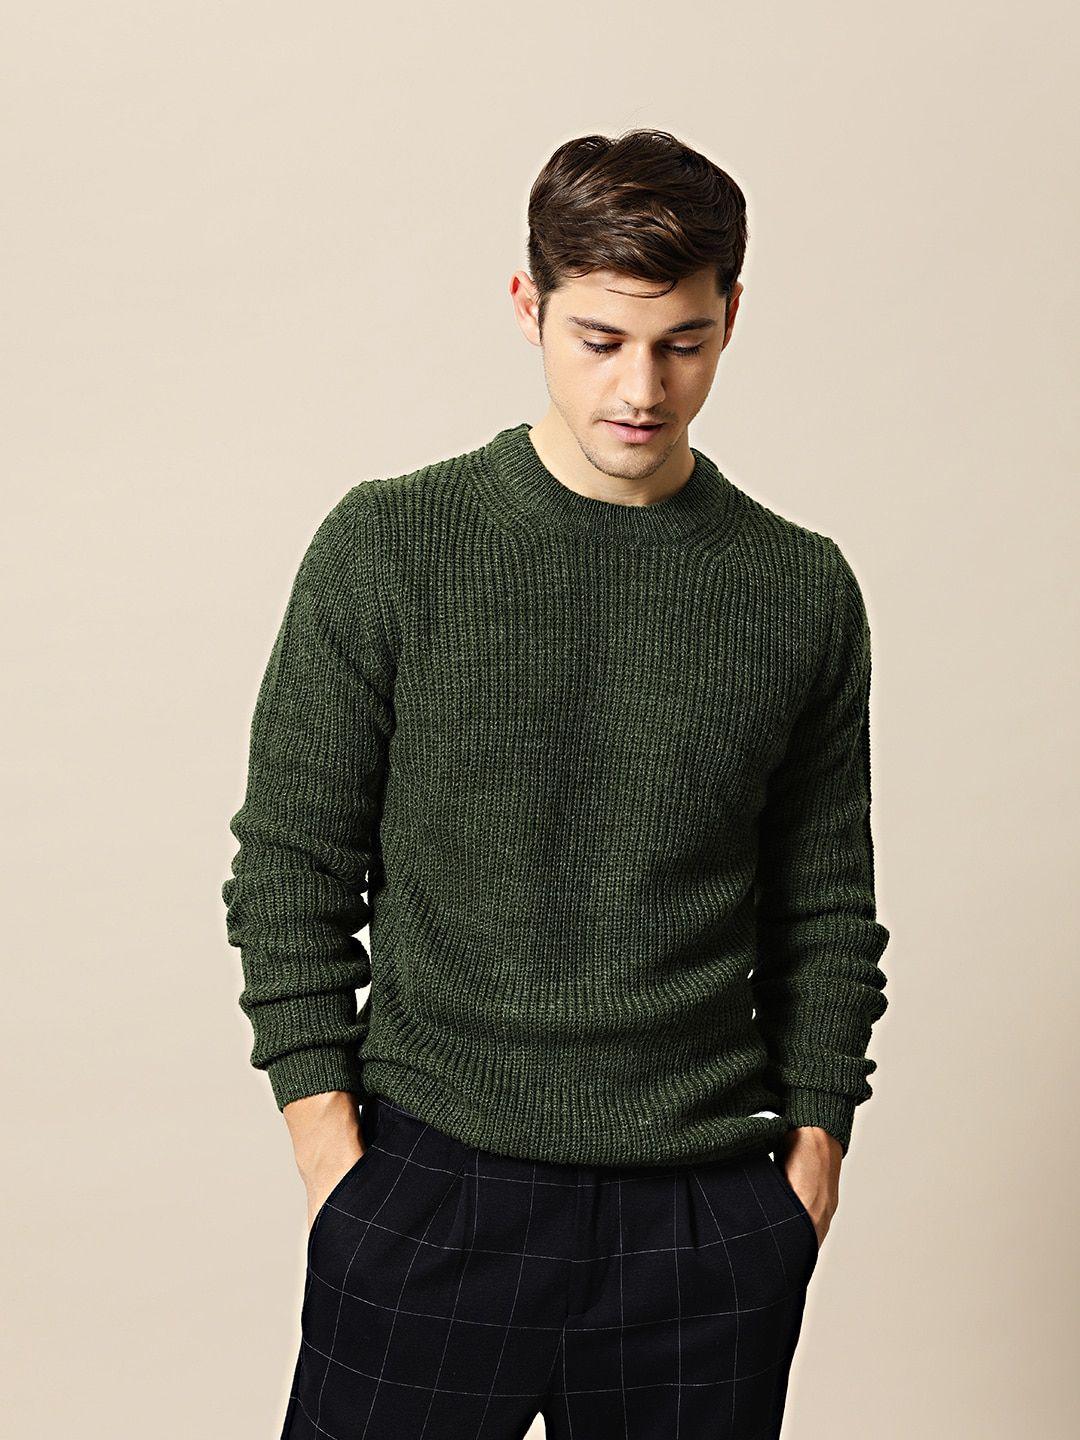 mr bowerbird men olive green solid pullover sweater